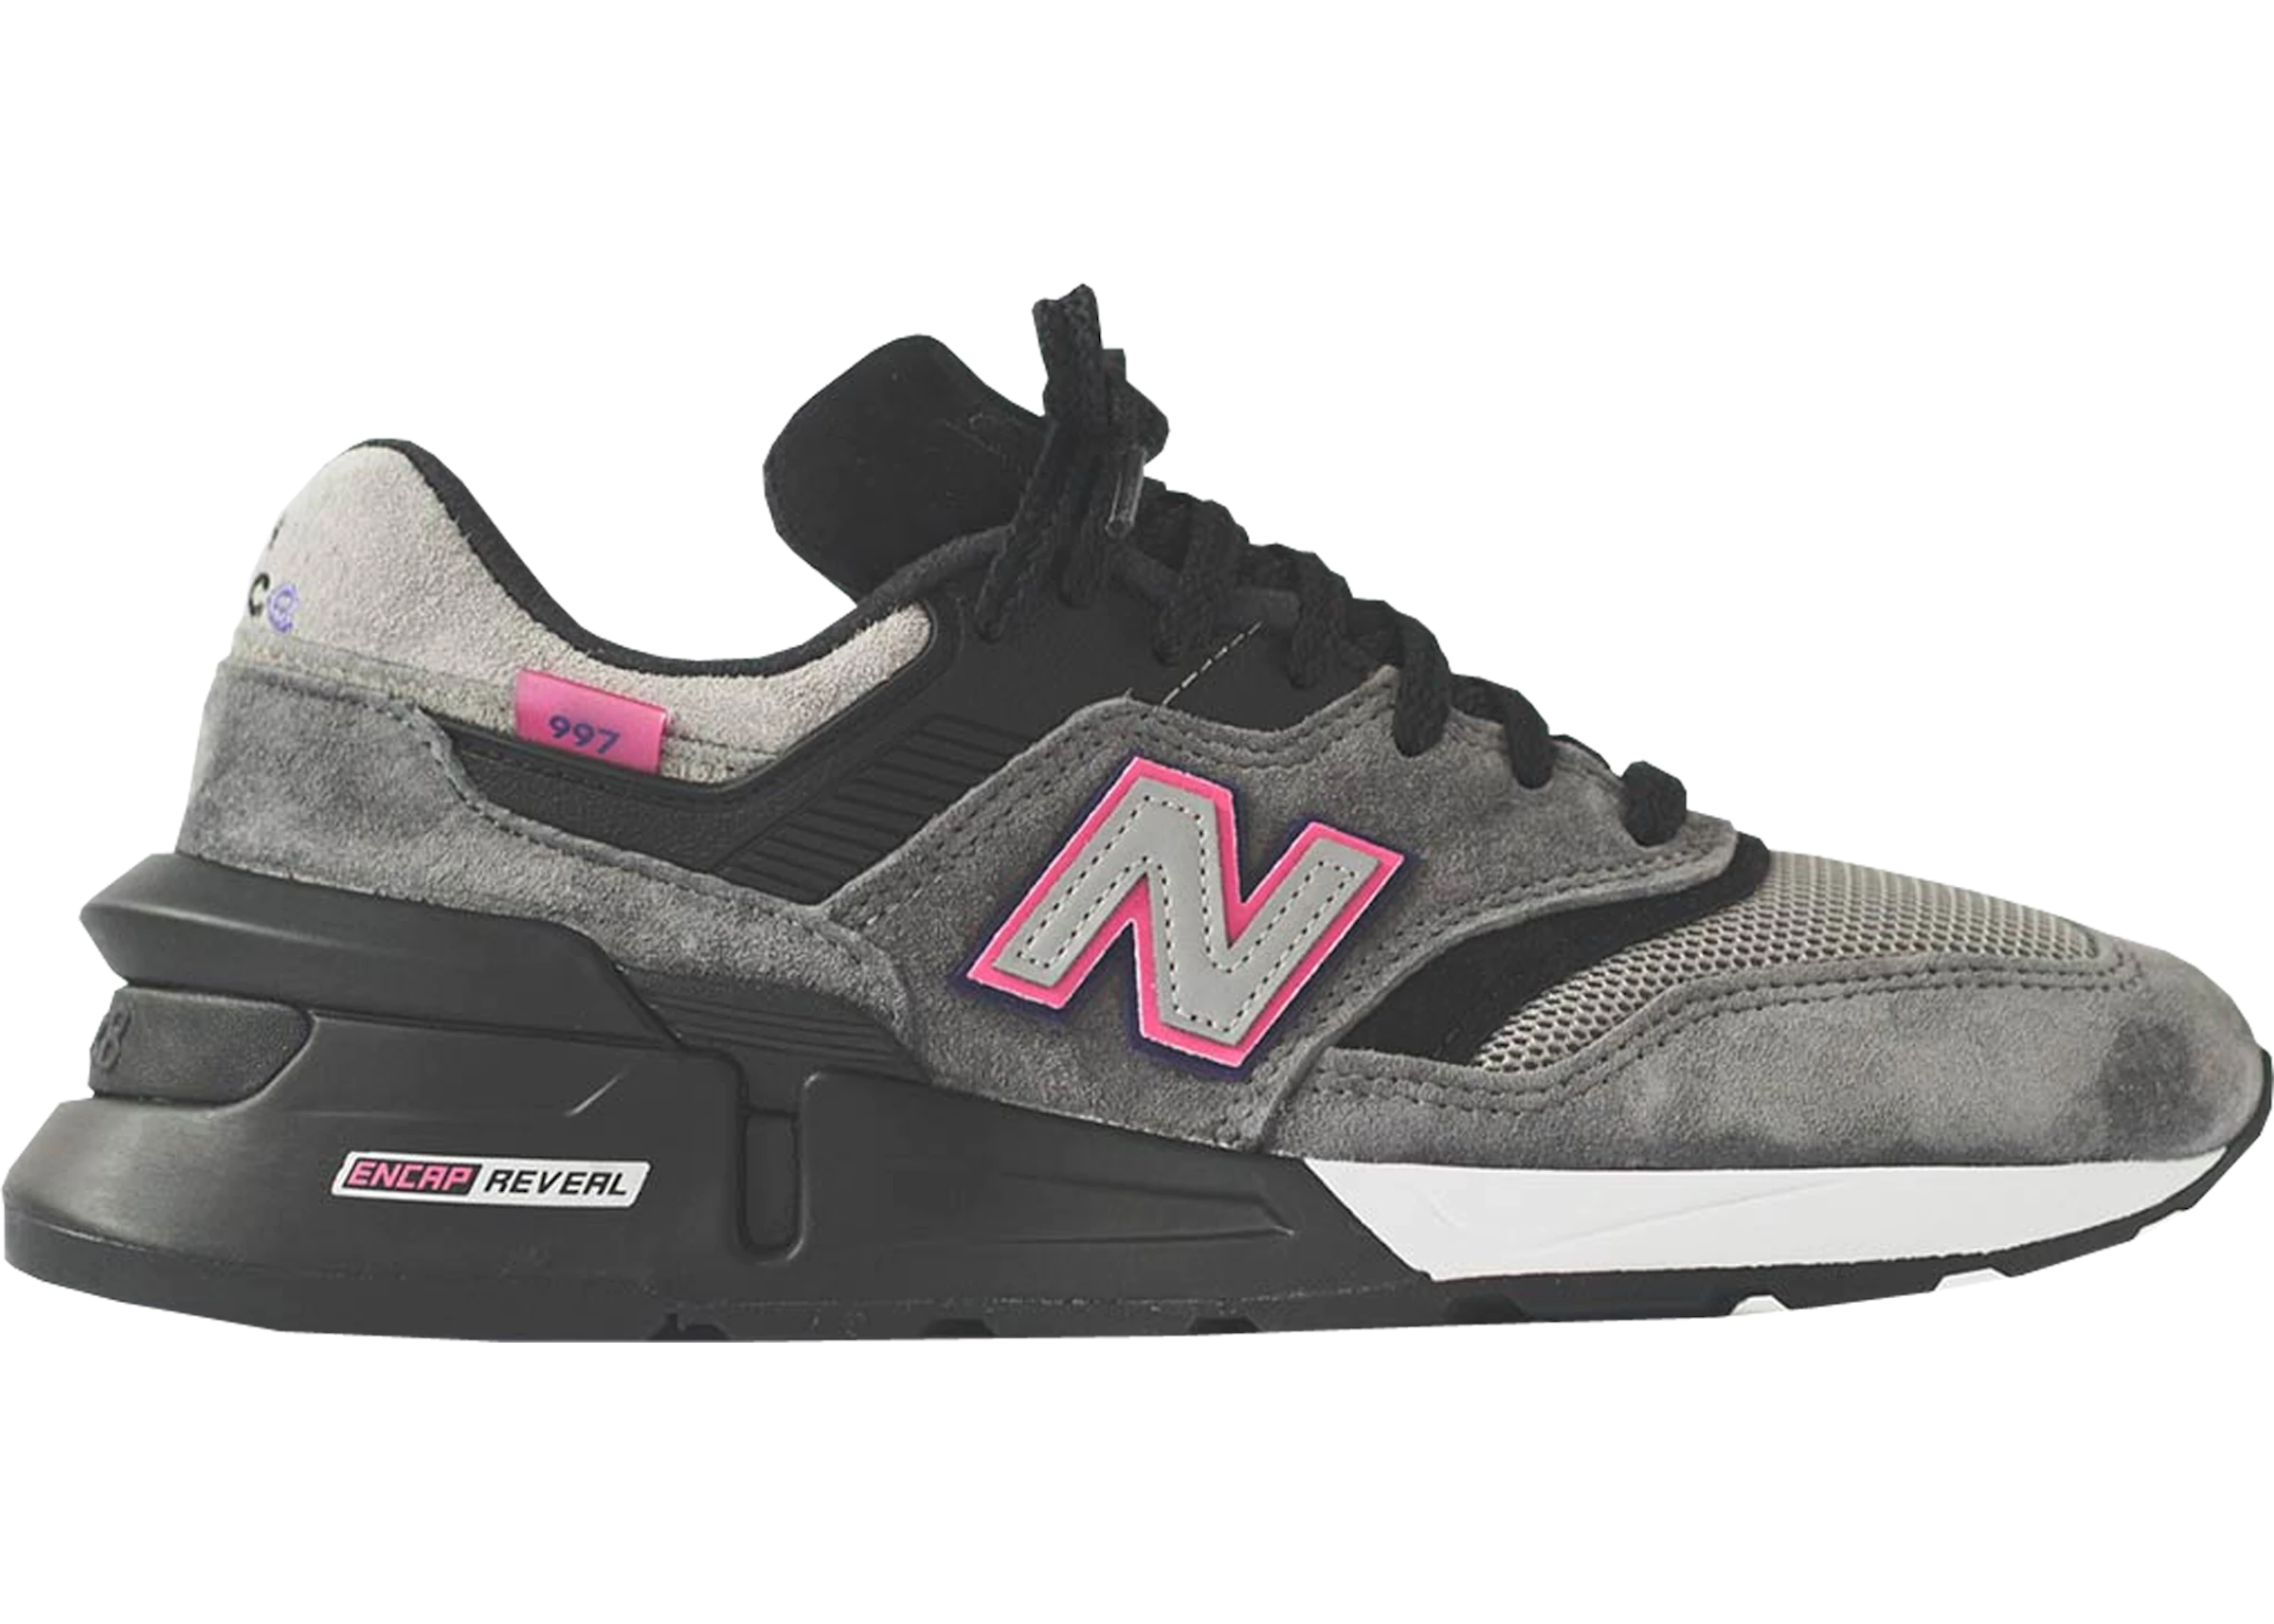 New Balance 997S Fusion Kith United Arrows & Sons Grey Pink